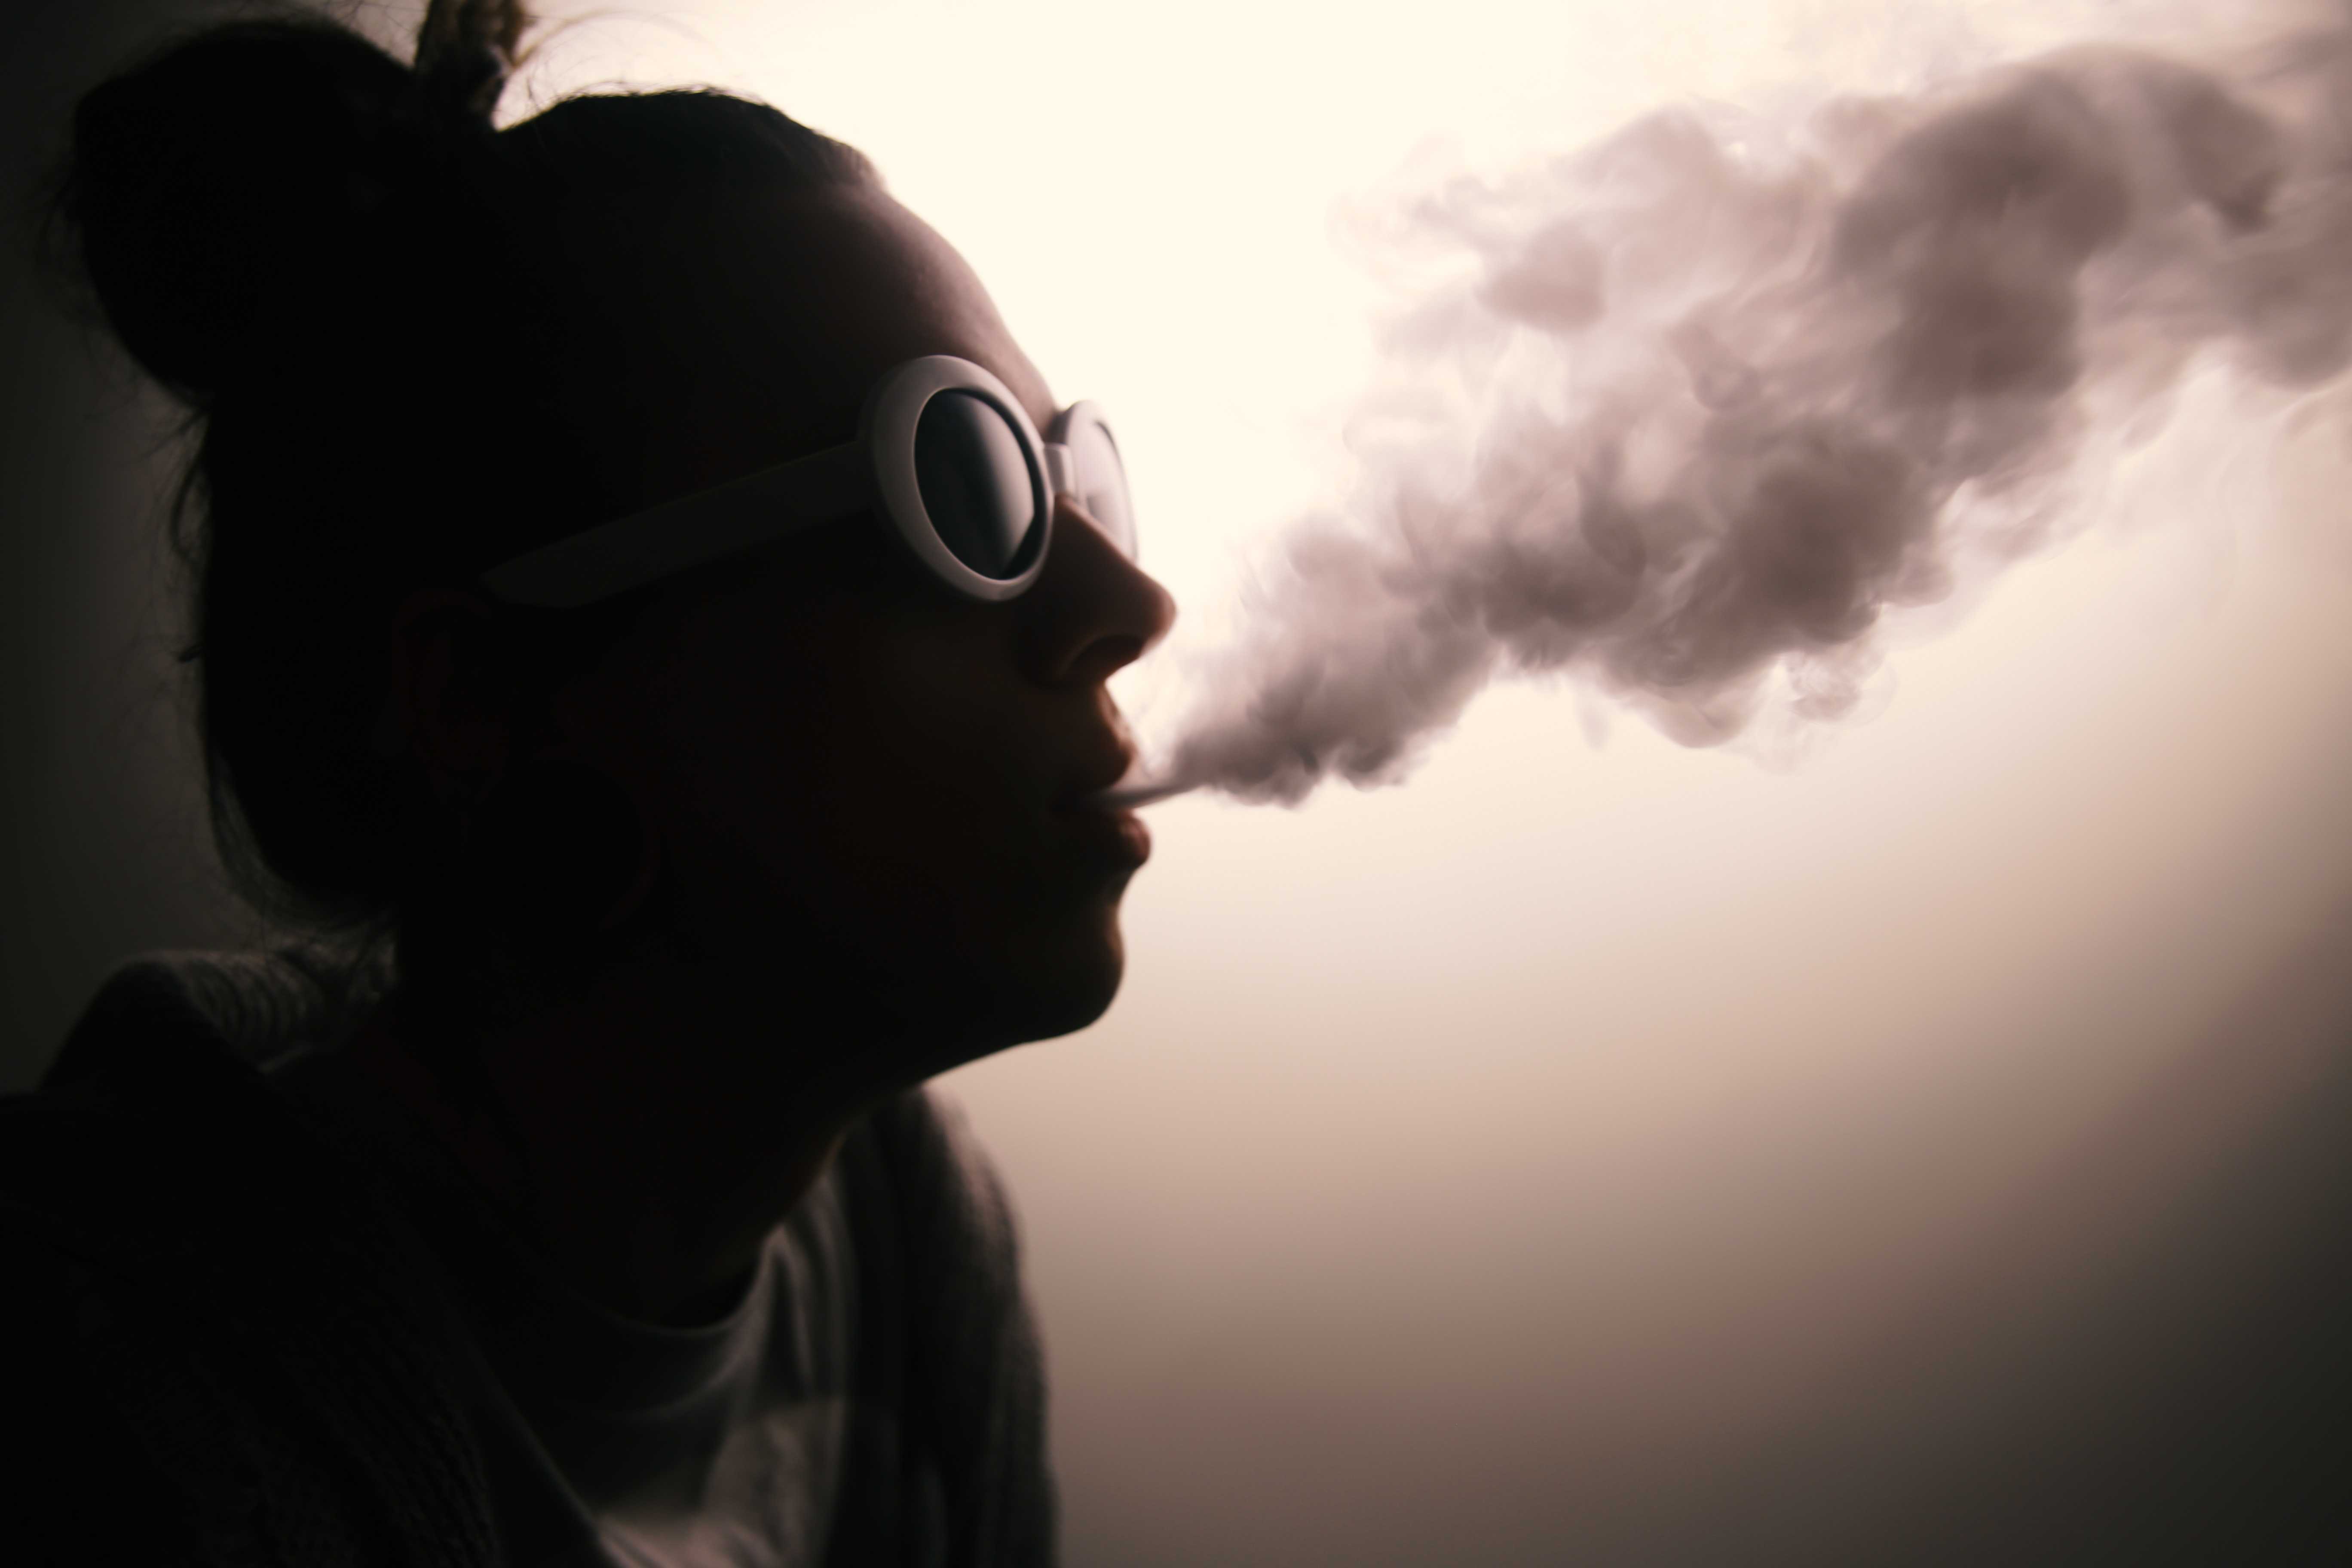 Photo illustration by Eriana Ruiz |  Seventy-five cases of severe lung disease have been linked to e-cigarette use in North Texas, according to the Texas Department of State Health Services